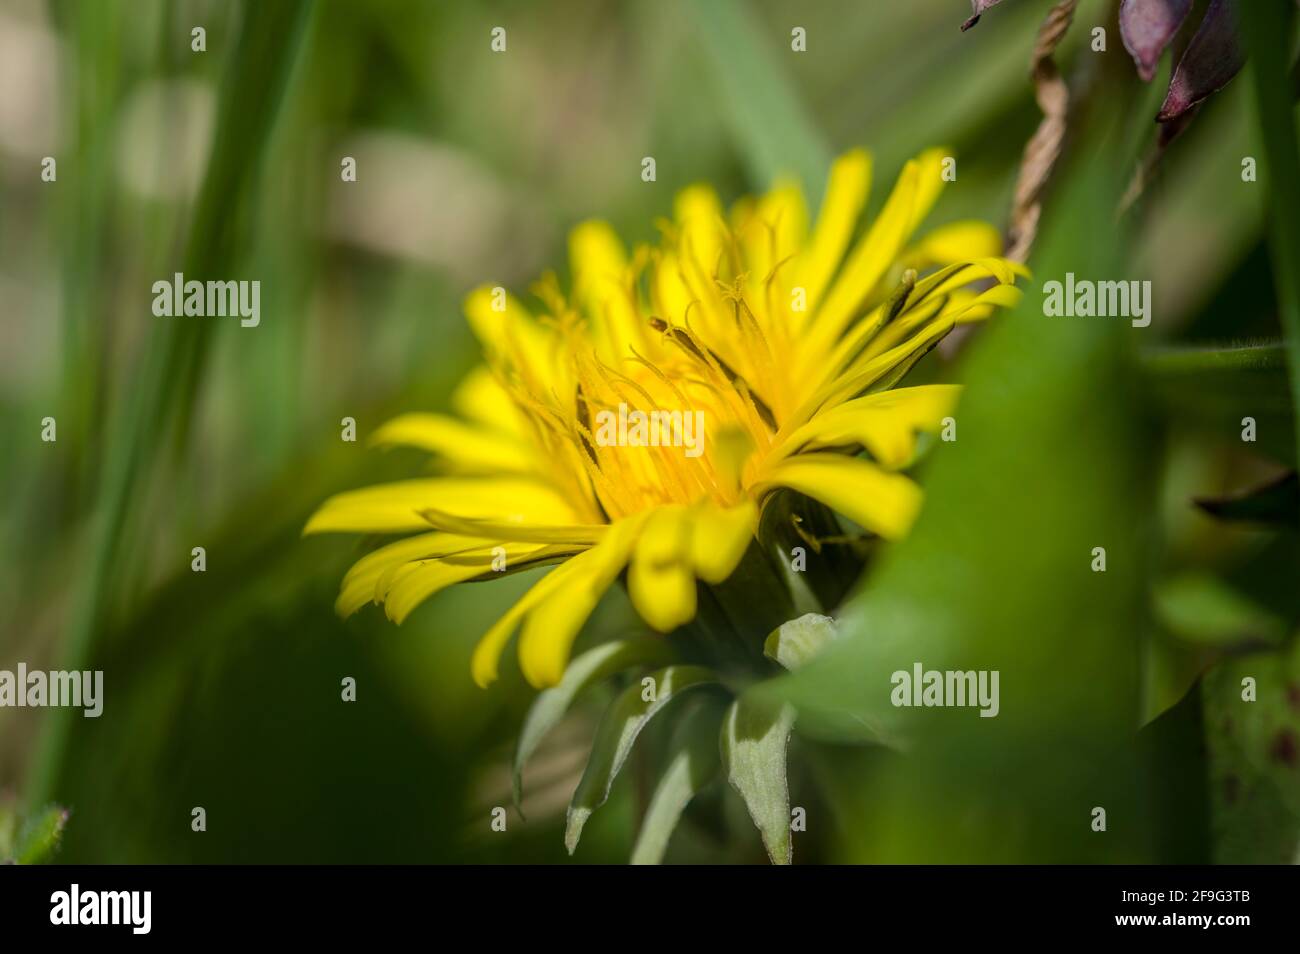 Dandelions on field in the grass, morning photo Stock Photo